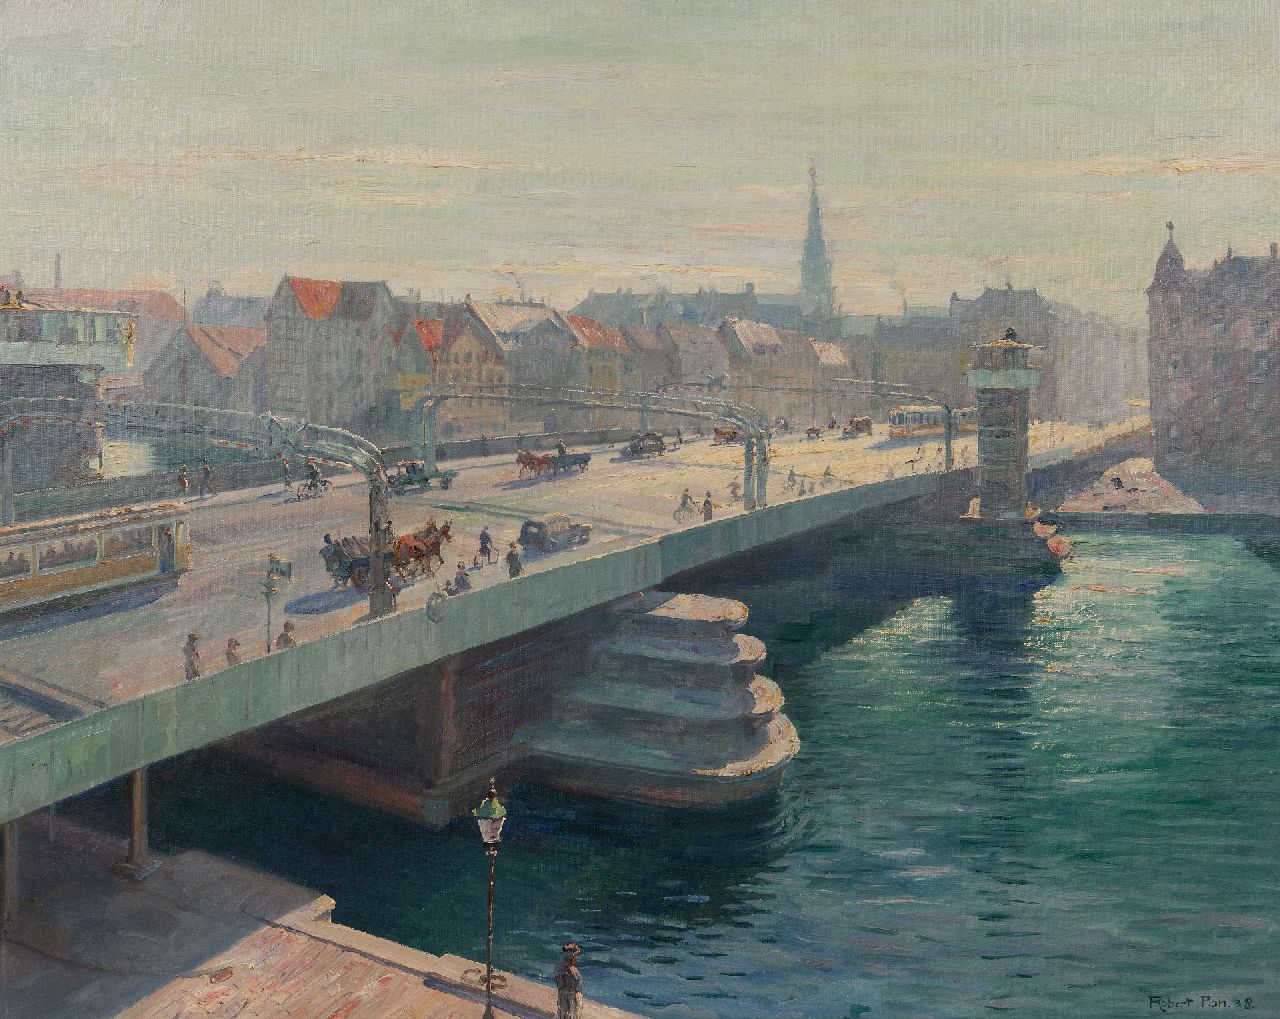 Panitzsch R.  | Robert Panitzsch | Paintings offered for sale | The new Knippelsbro Bridge in Copenhagen, oil on canvas 75.5 x 95.6 cm, signed l.r. and dated '38